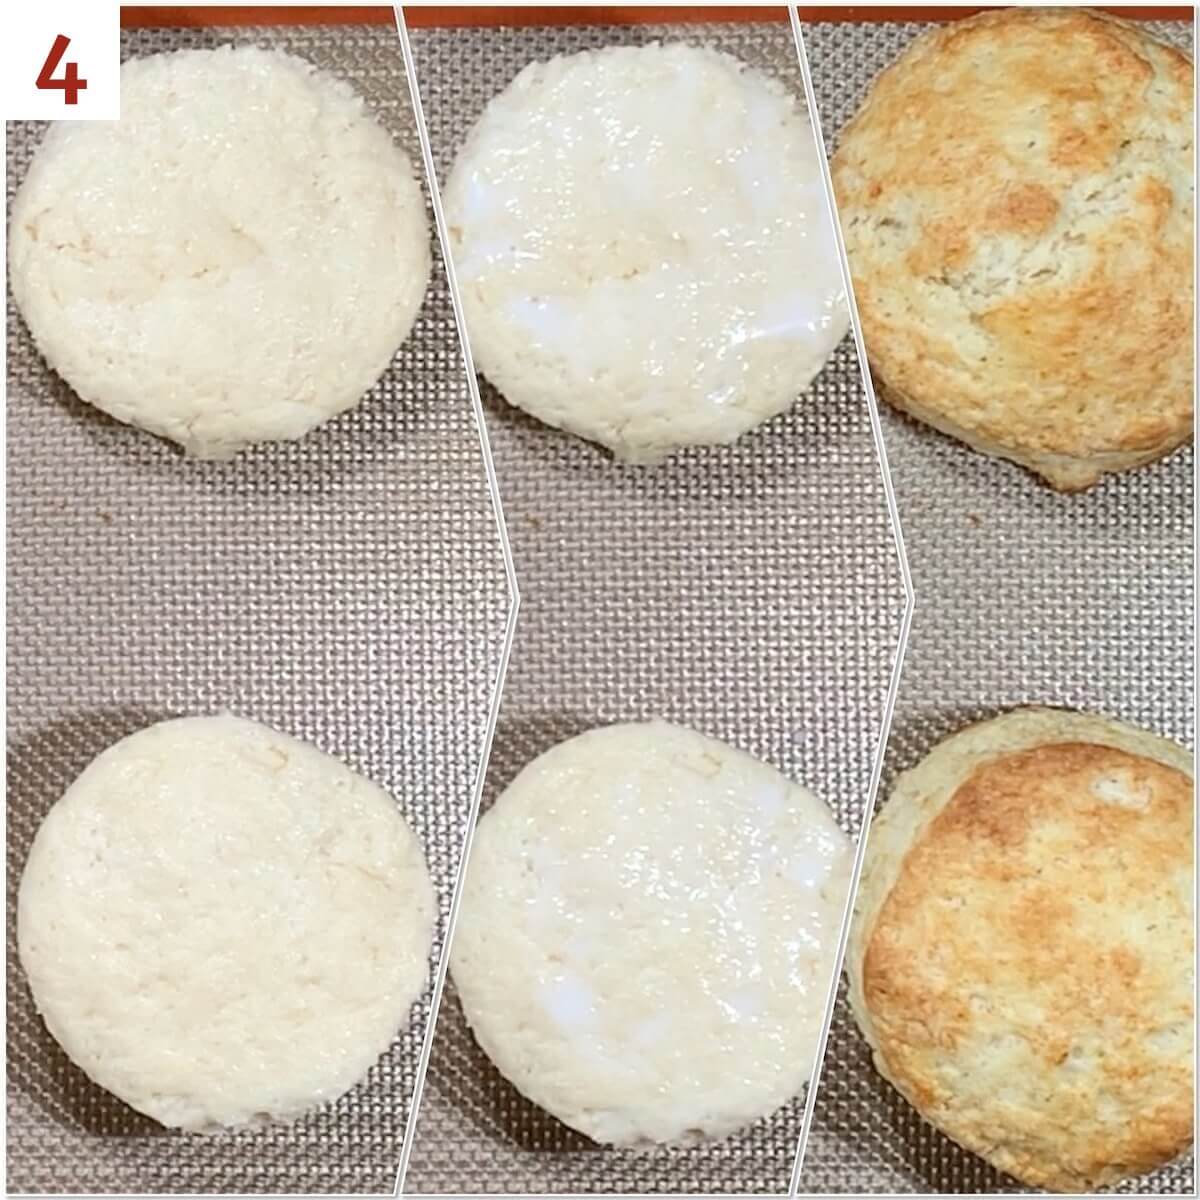 Collage of shortcake biscuits before & after baking.